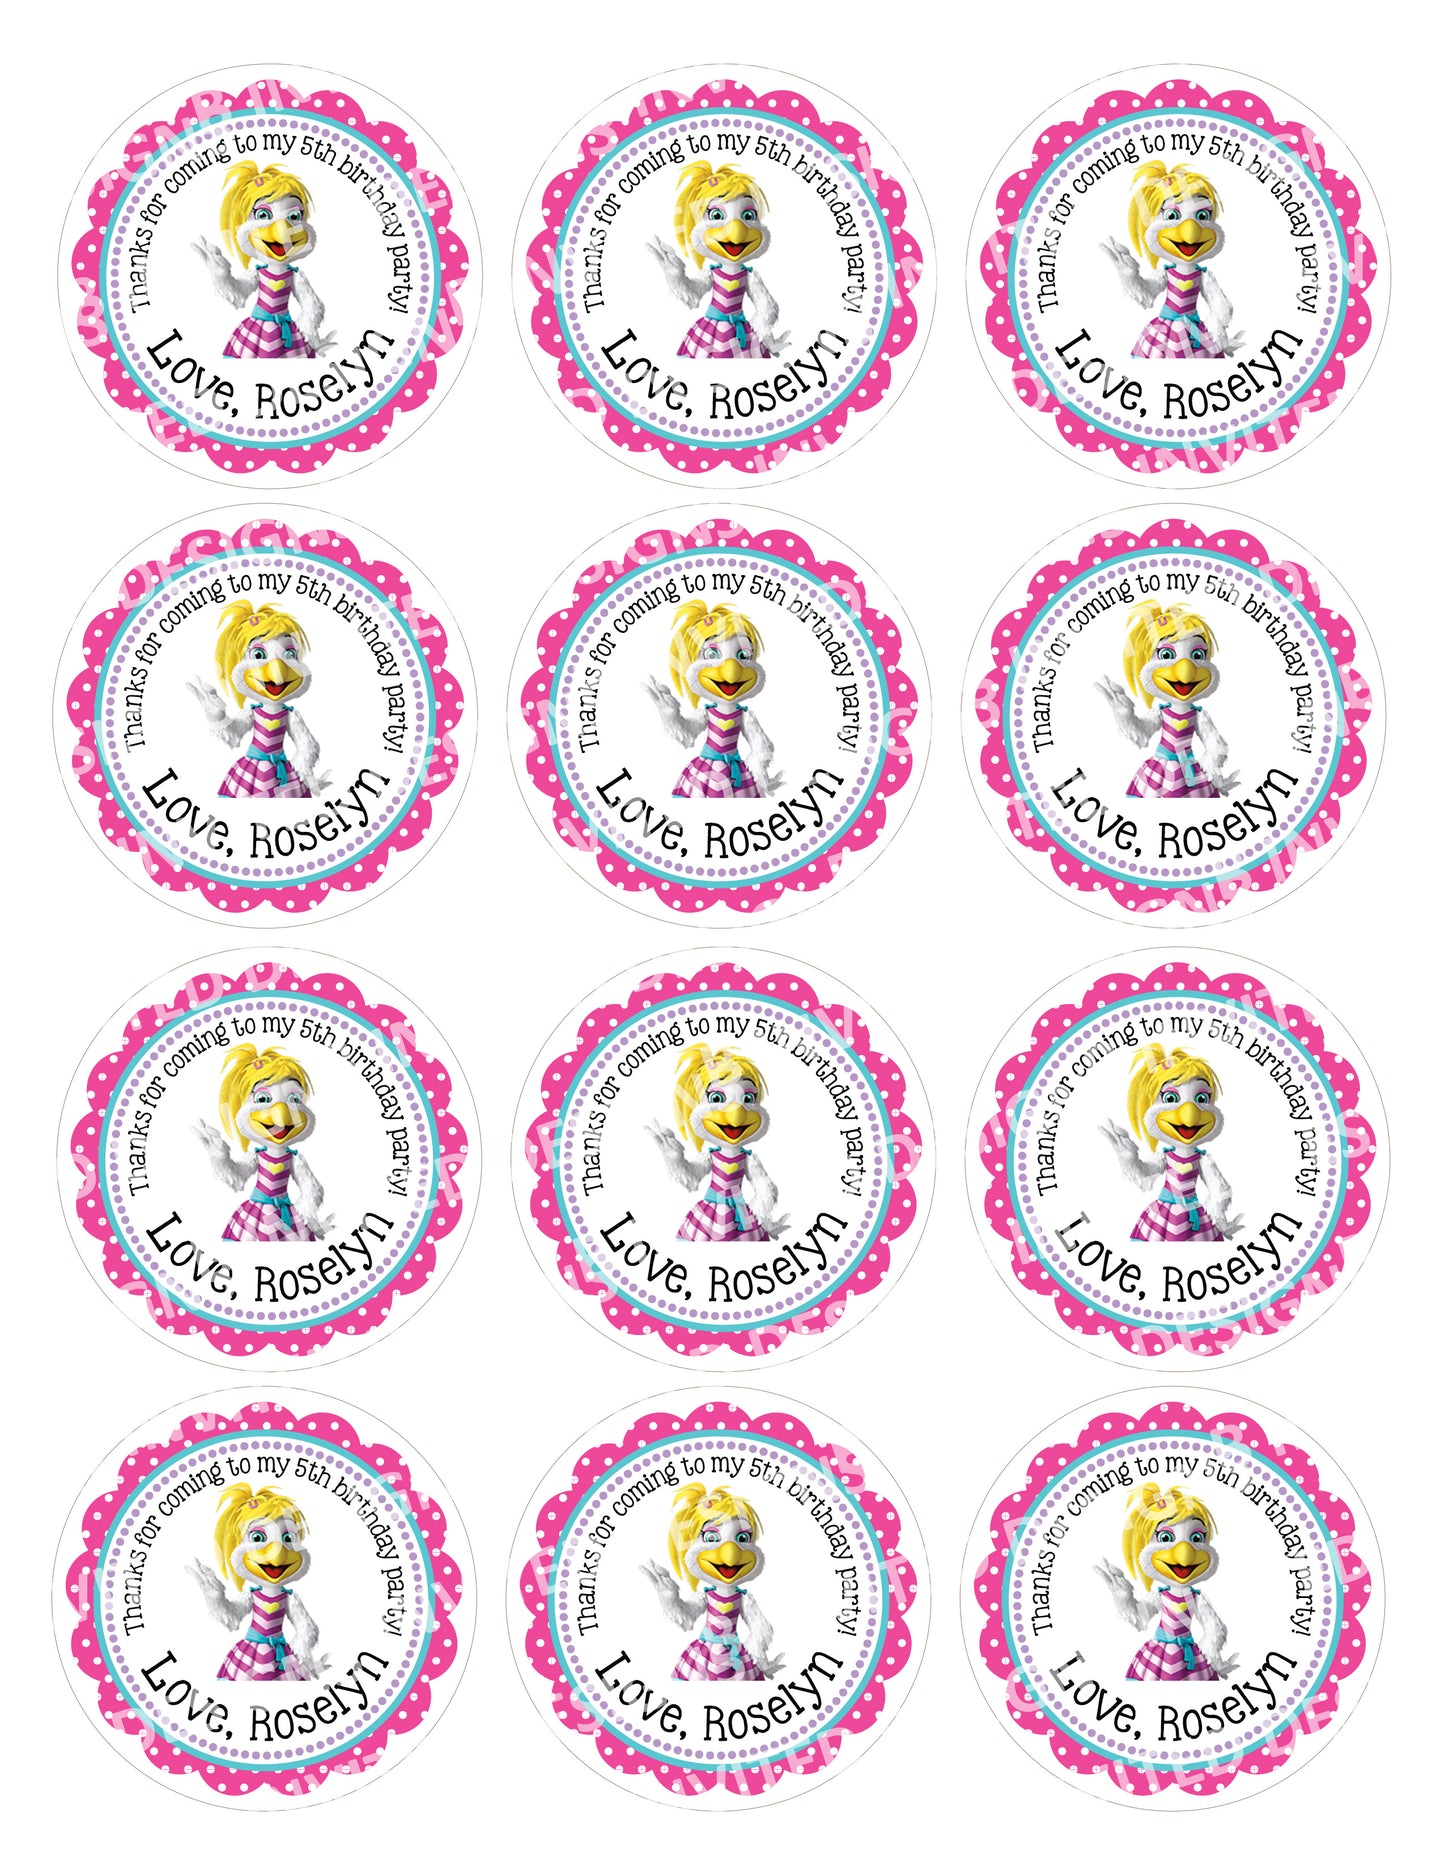 CHUCK E CHEESE Digital or Printed Custom Stickers for Gift Bags, Party Favors! Helen Henny or Chuck E!